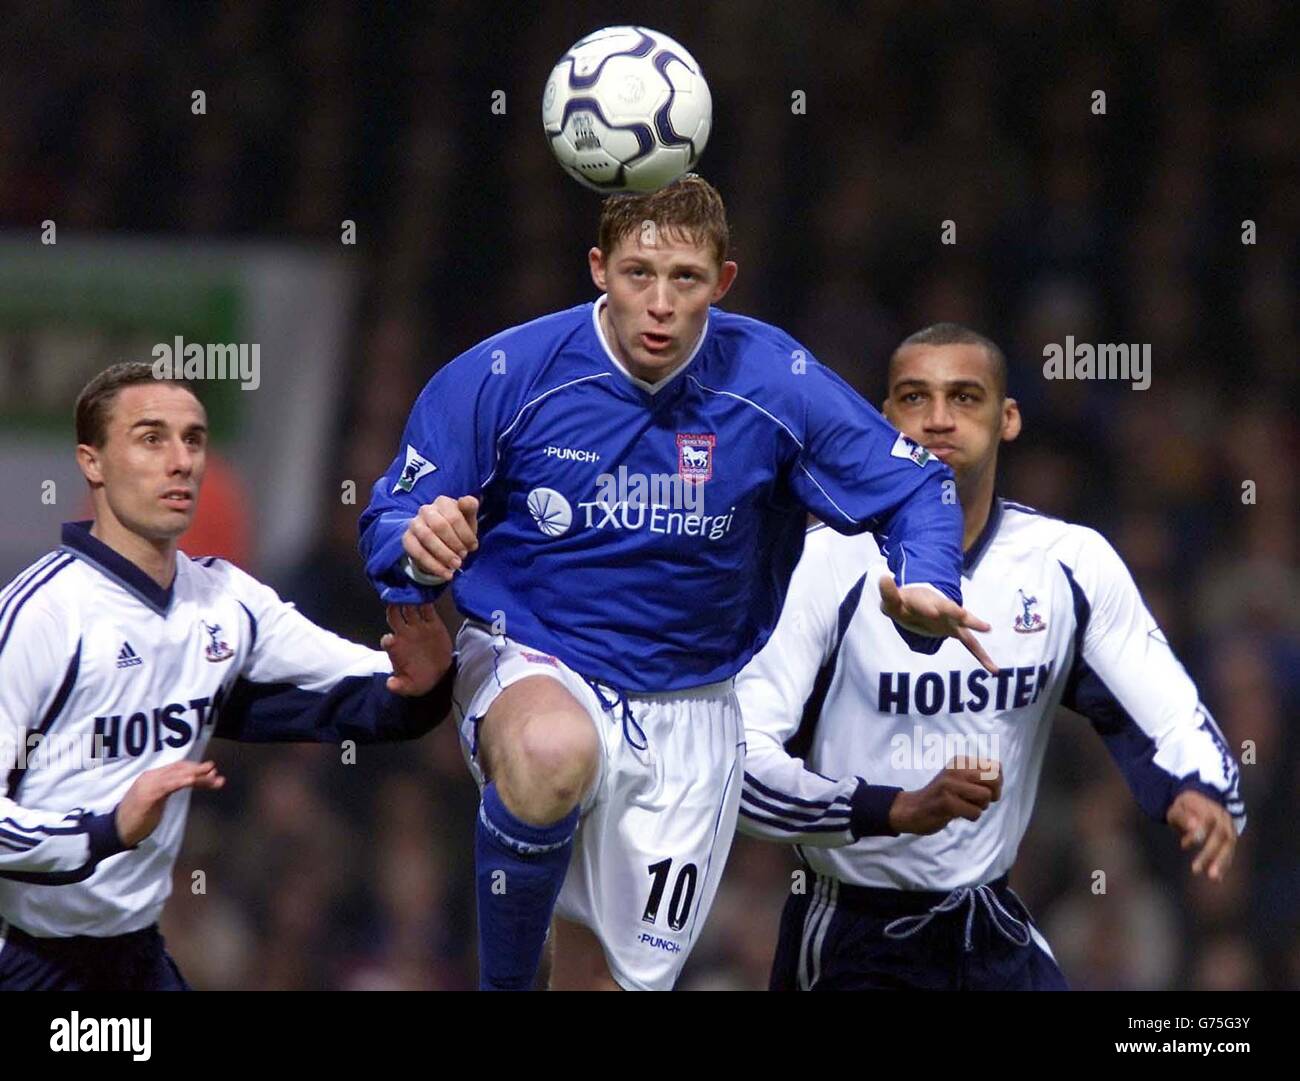 Ipswich Town's Alun Armstrong goes up for the high ball with Tottenham Hotspurs' Chris Perry (left) and Dean Richards (right), during their FA Barclaycard Premiership match at Ipswich's Portman Road ground. Stock Photo